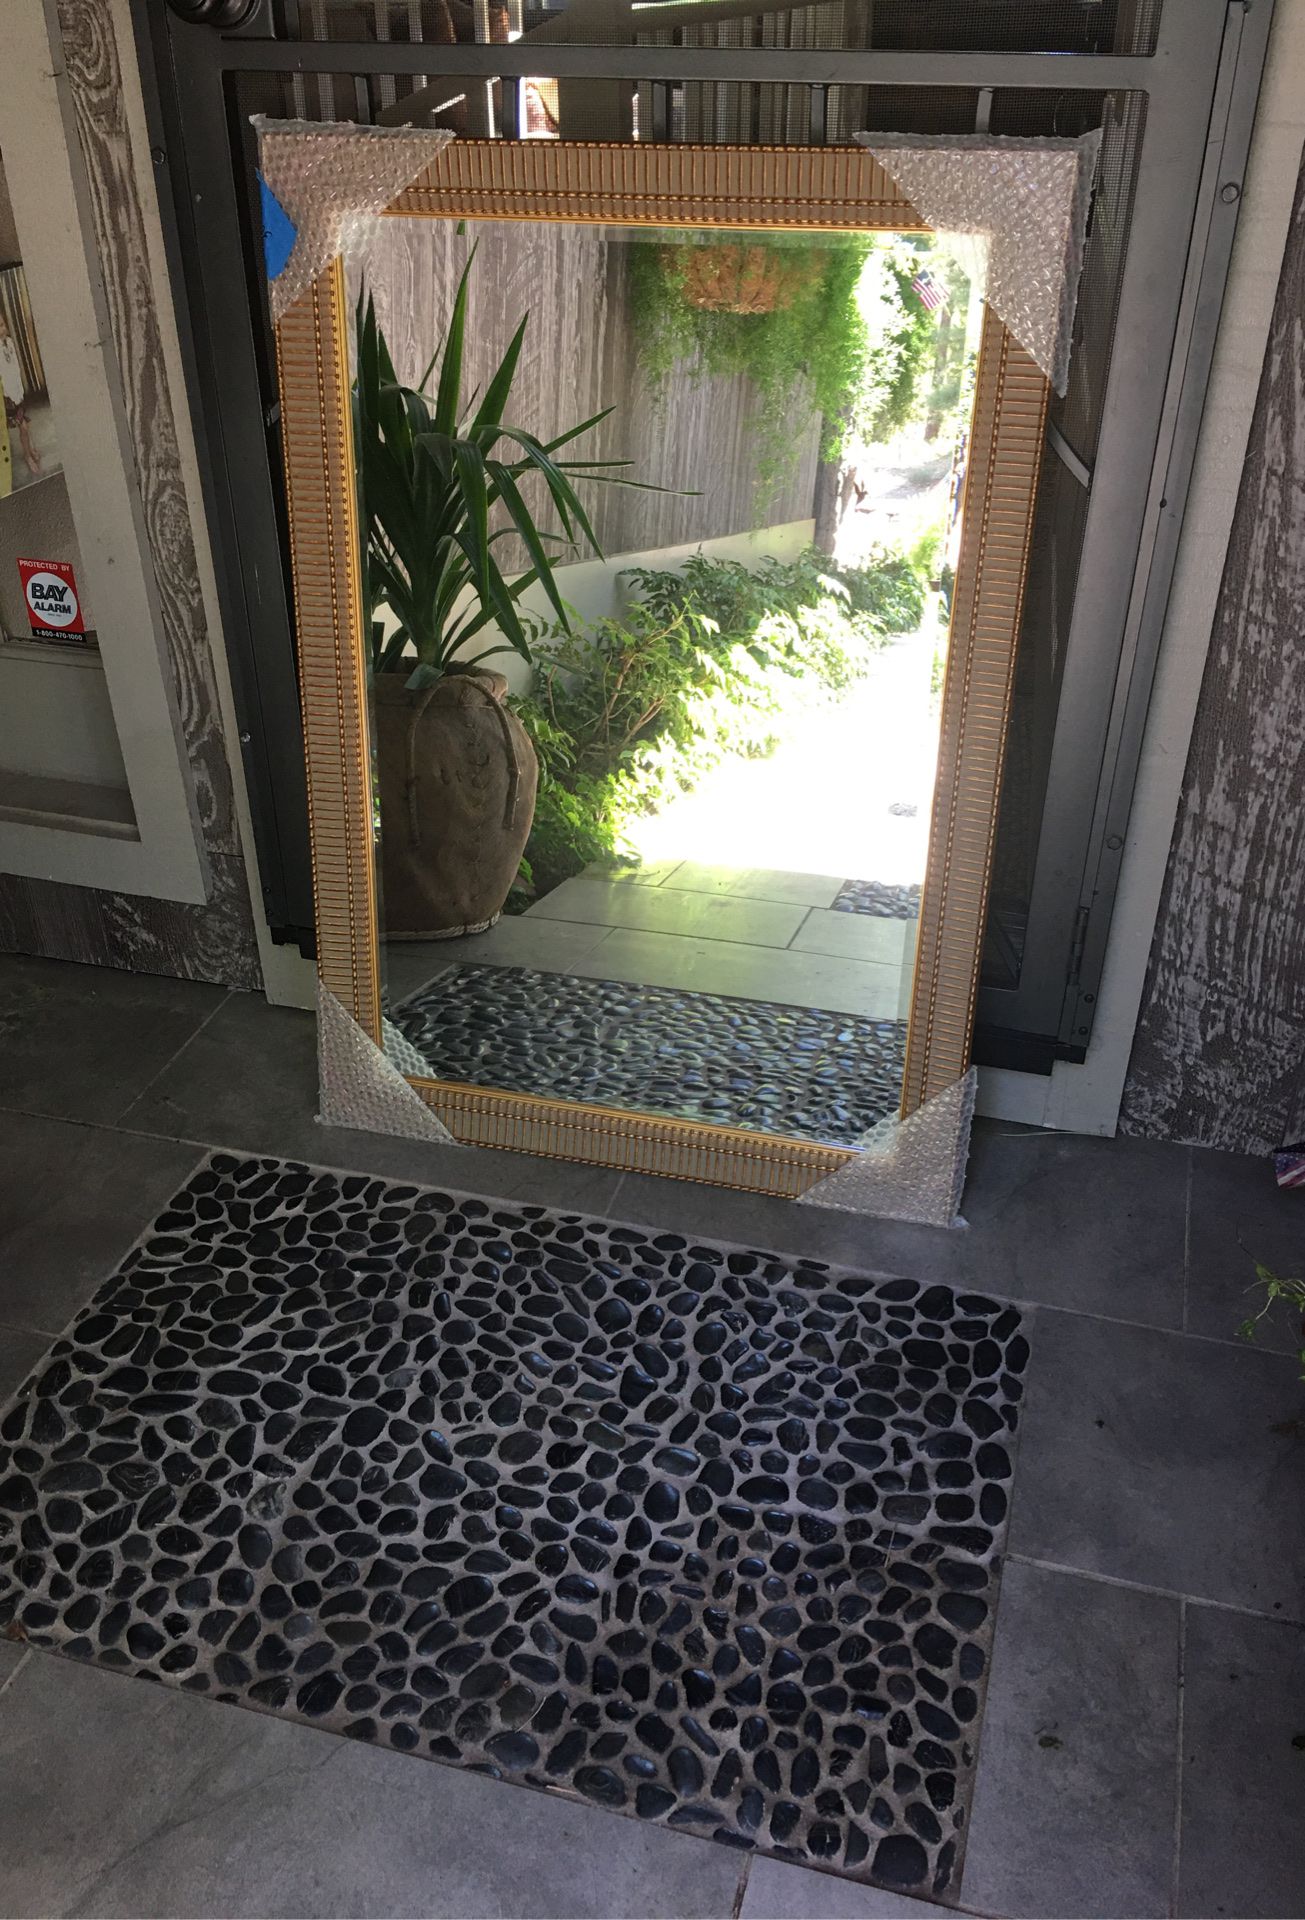 28x41 mirror with gilded frame.